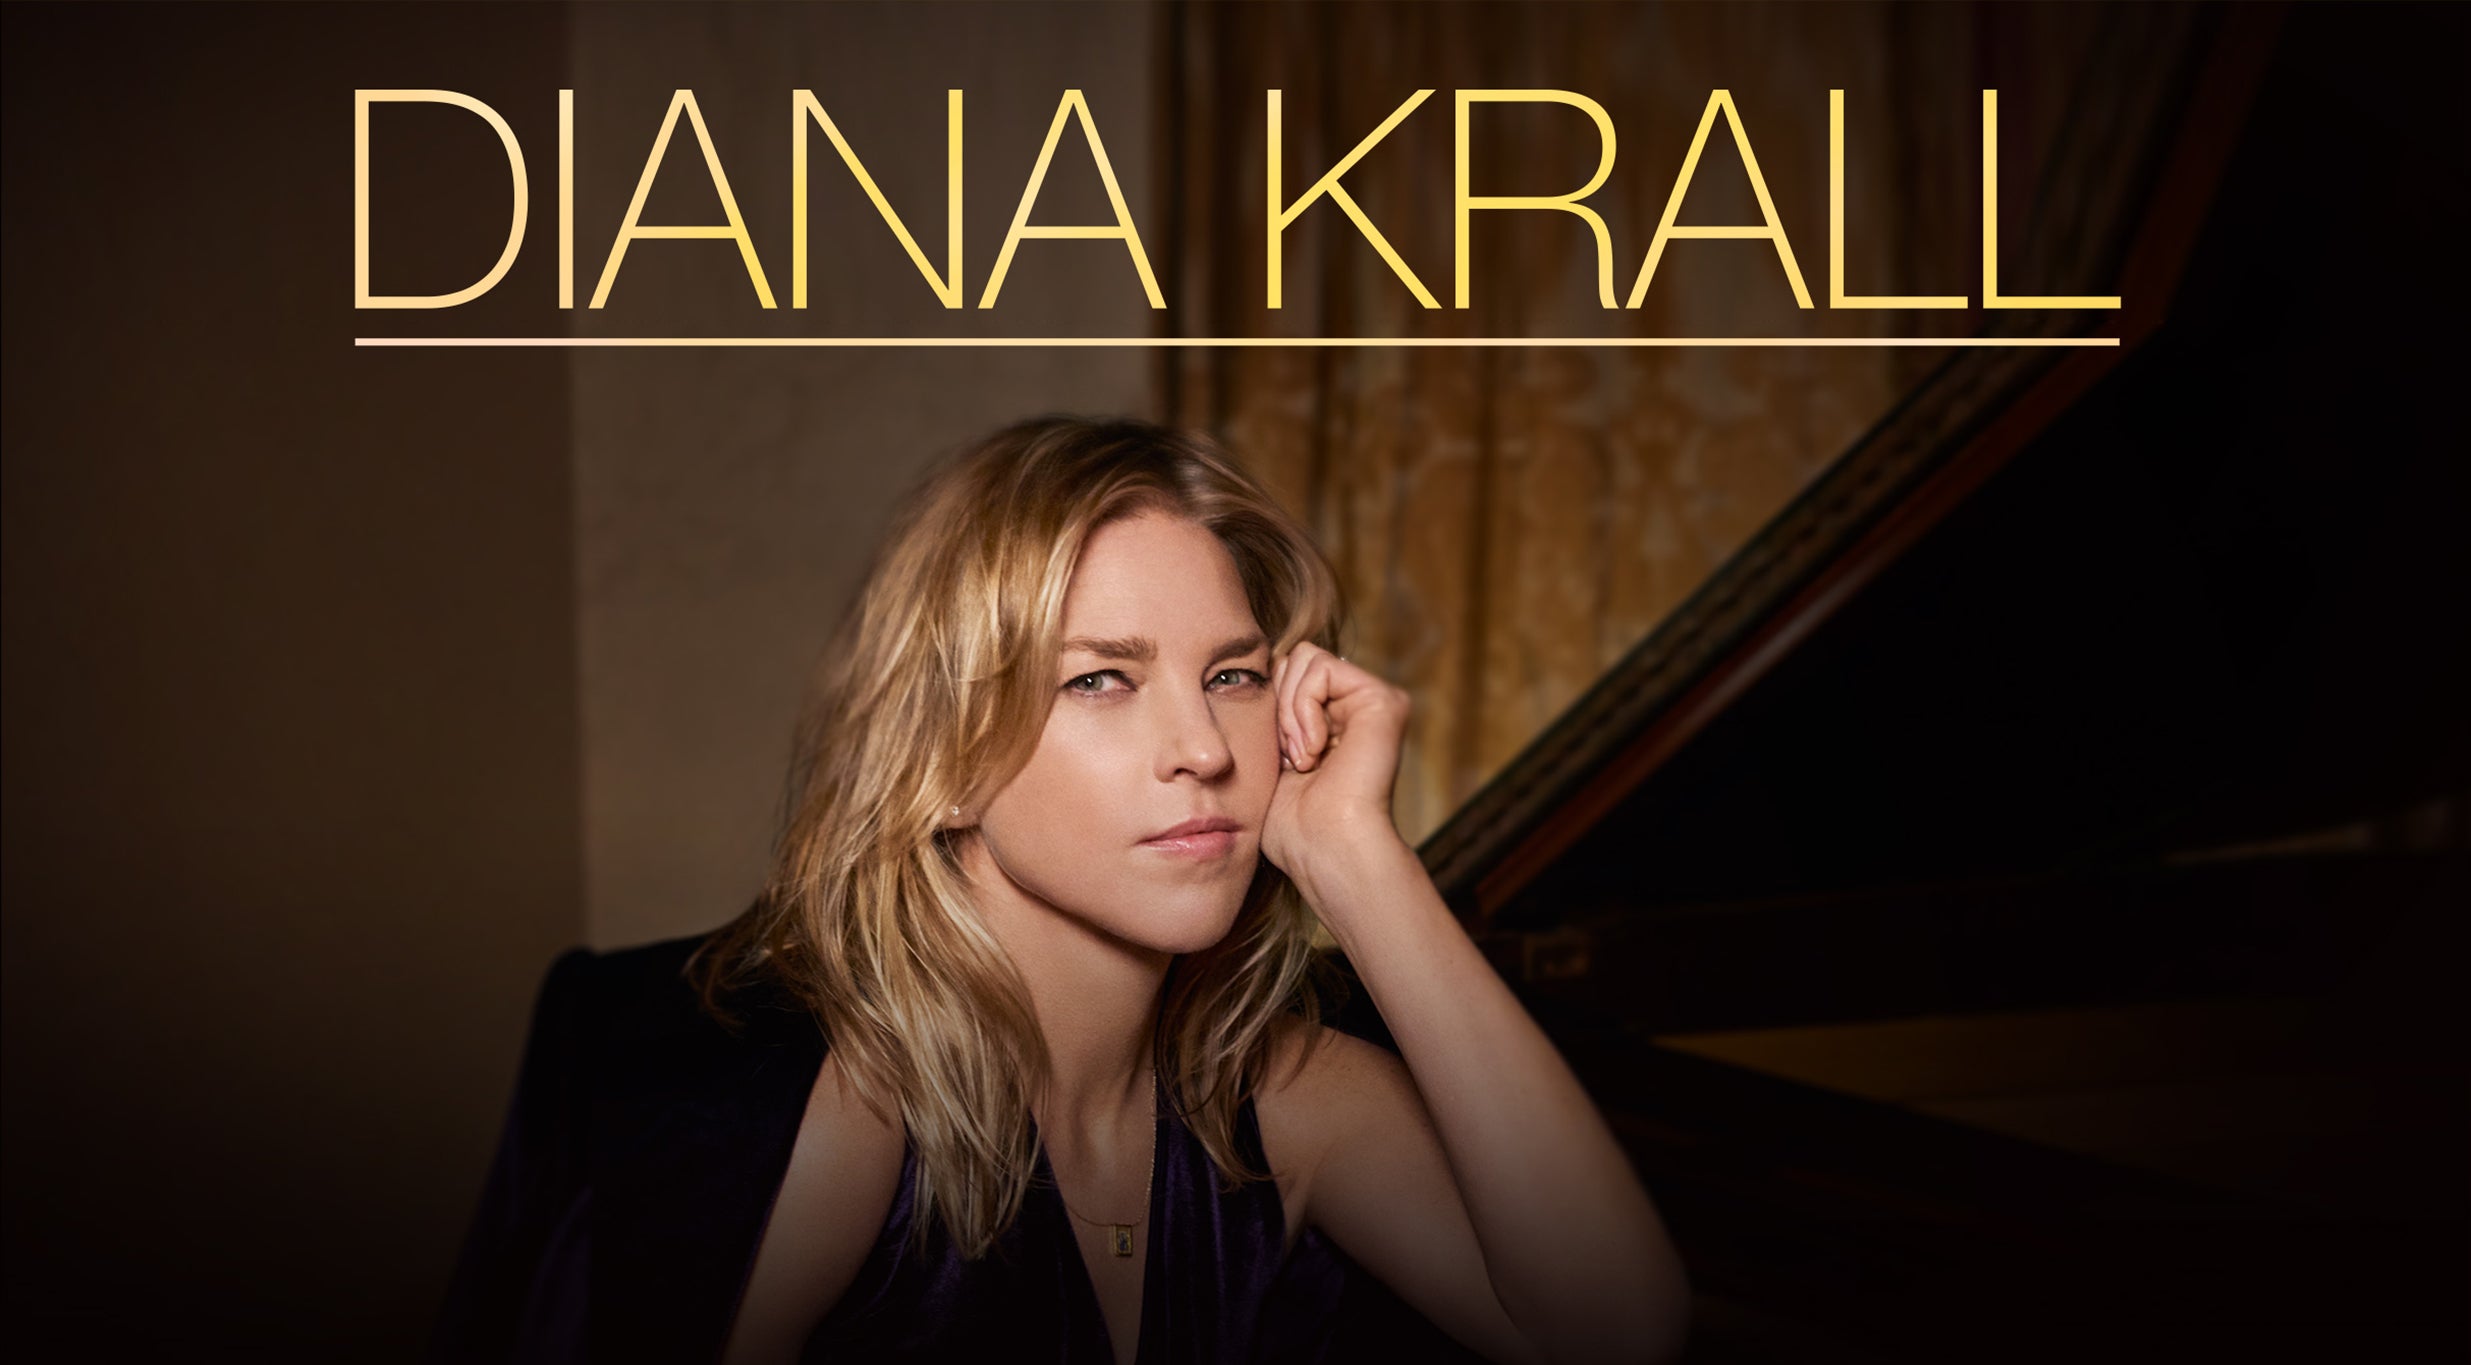 Diana Krall in Hershey promo photo for Spotify presale offer code